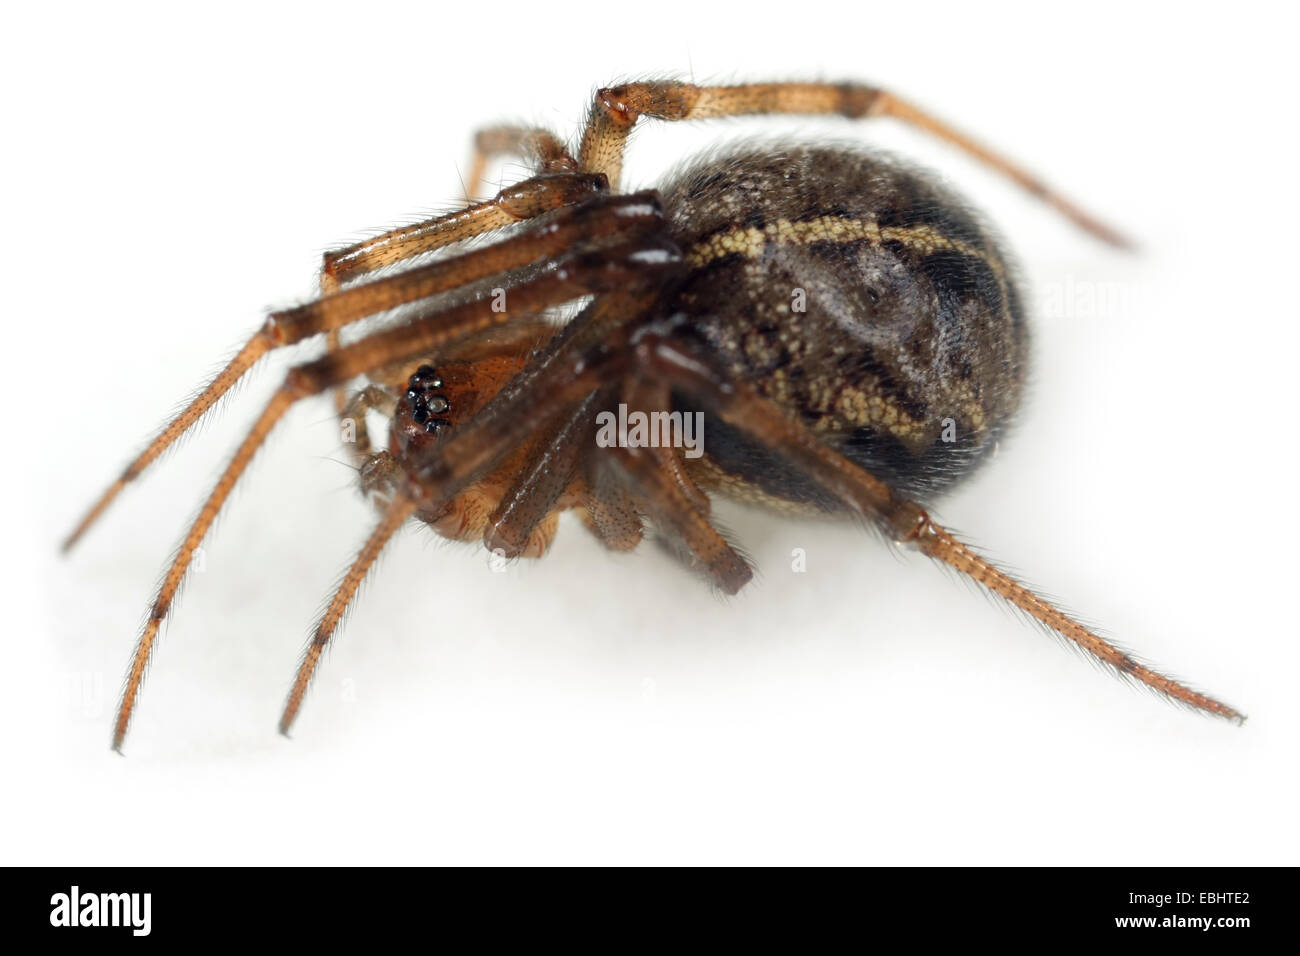 A female Steatoda castanea spider, on a white background. Part of the family Theridiidae - Cobweb weavers. Stock Photo